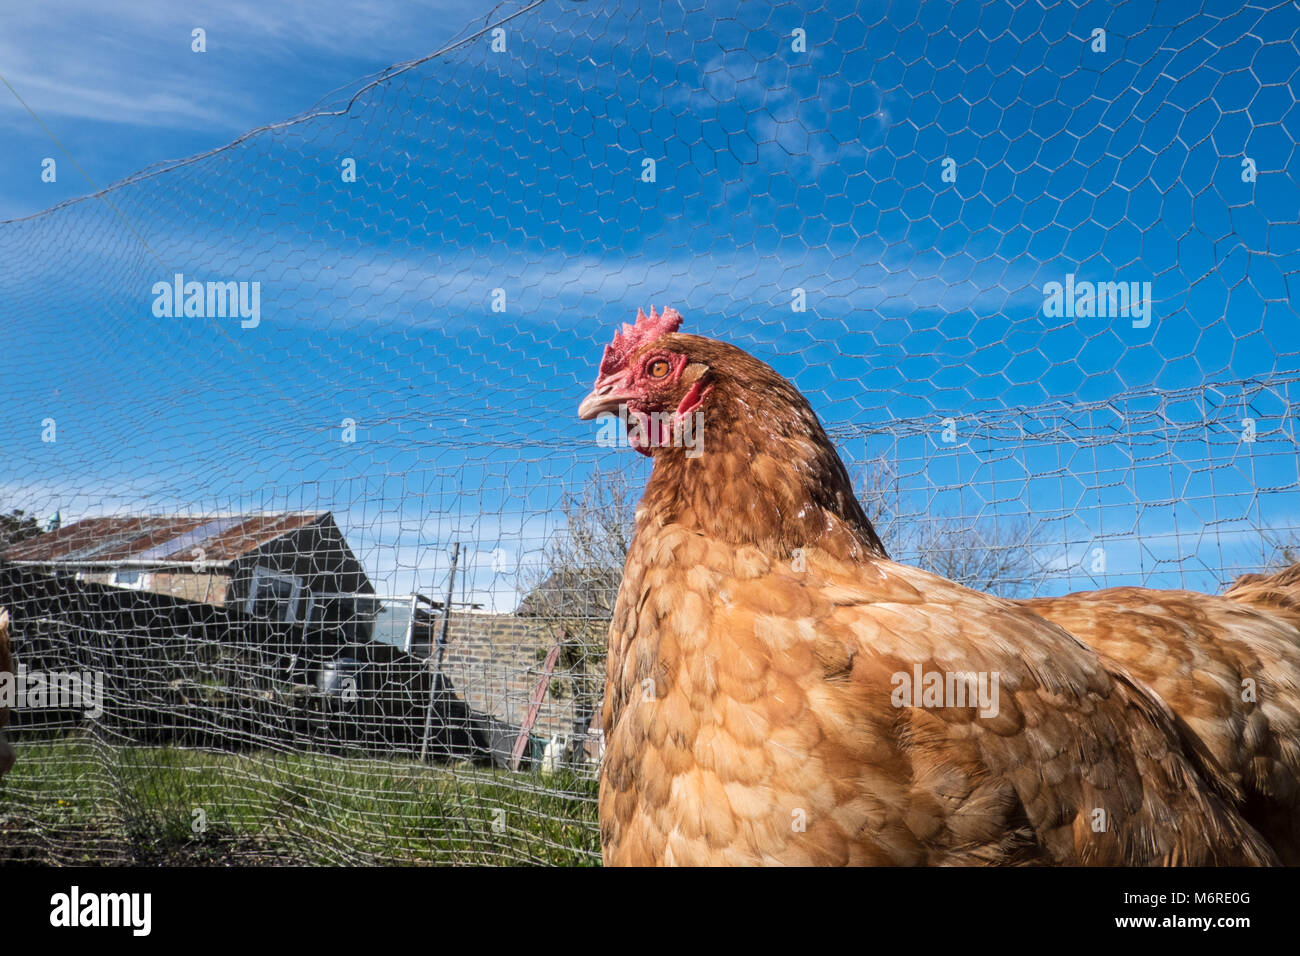 Llansaint, Carmarthenshire, Wales, UK. 6th March, 2018. UK Weather: Backyarden garden chicken hens having endured recent freezing conditions out in the sun. Today basking in the sun with, more spring conditions, temperatures of 7 degrees centigrade in village of Llansaint,Carmarthenshire,Wales U.K.The brown hens are Warren breed and white one is Light Sussex.Part of a small flock of 7 birds.Model and property released as the birds are my property as is the garden. Credit: Paul Quayle/Alamy Live News Stock Photo